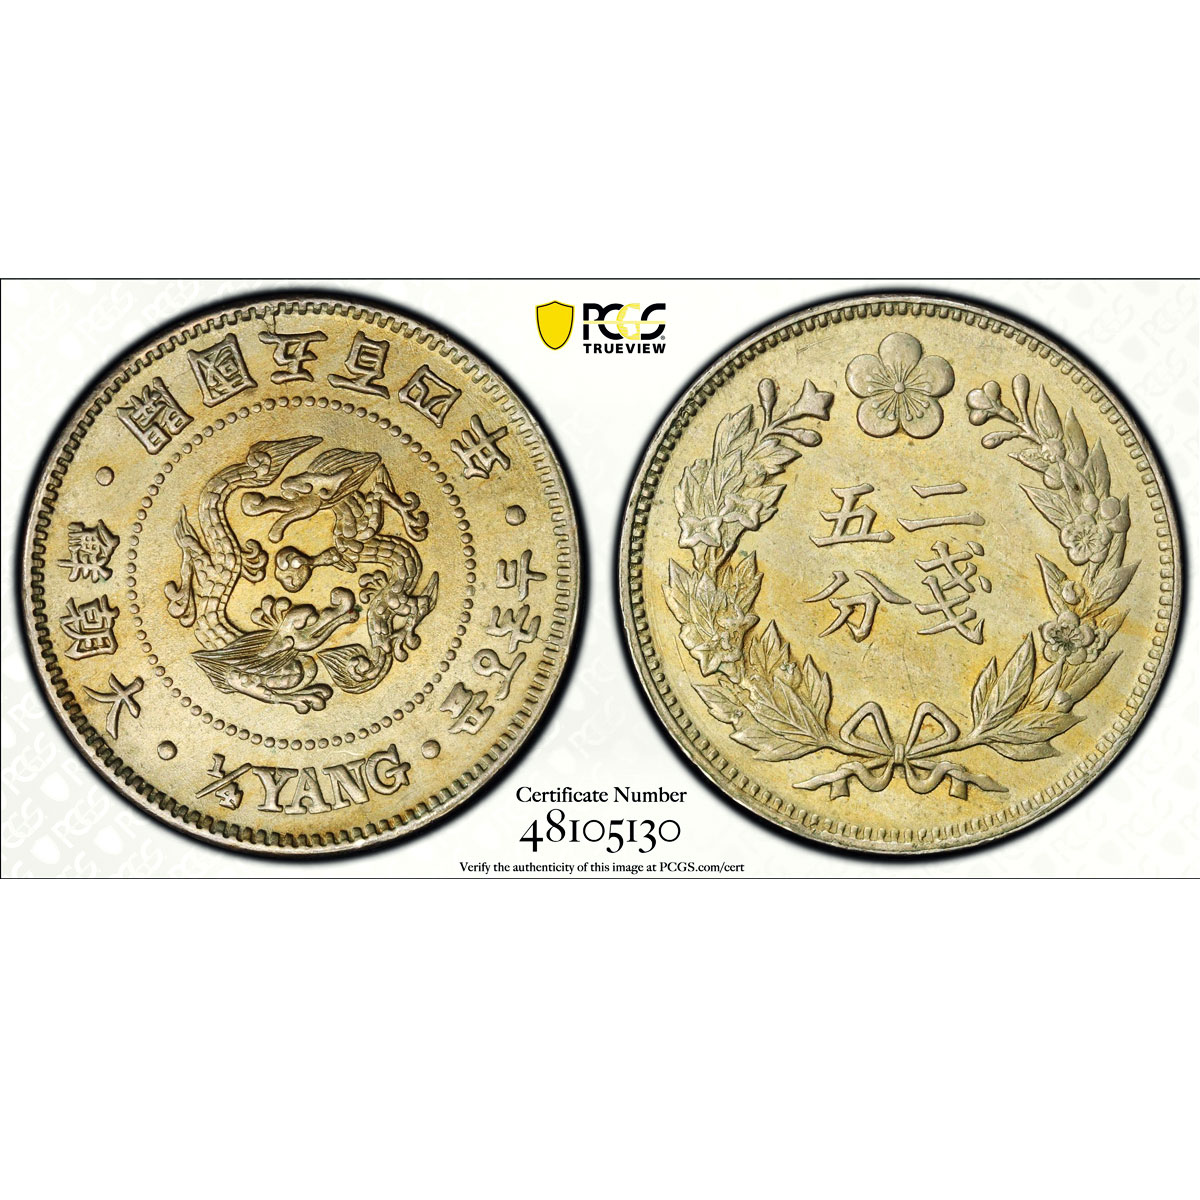 Korea 1/4 yang Regular Coinage Two Dragons KM-1109 MS63 PCGS CuNi coin 1895